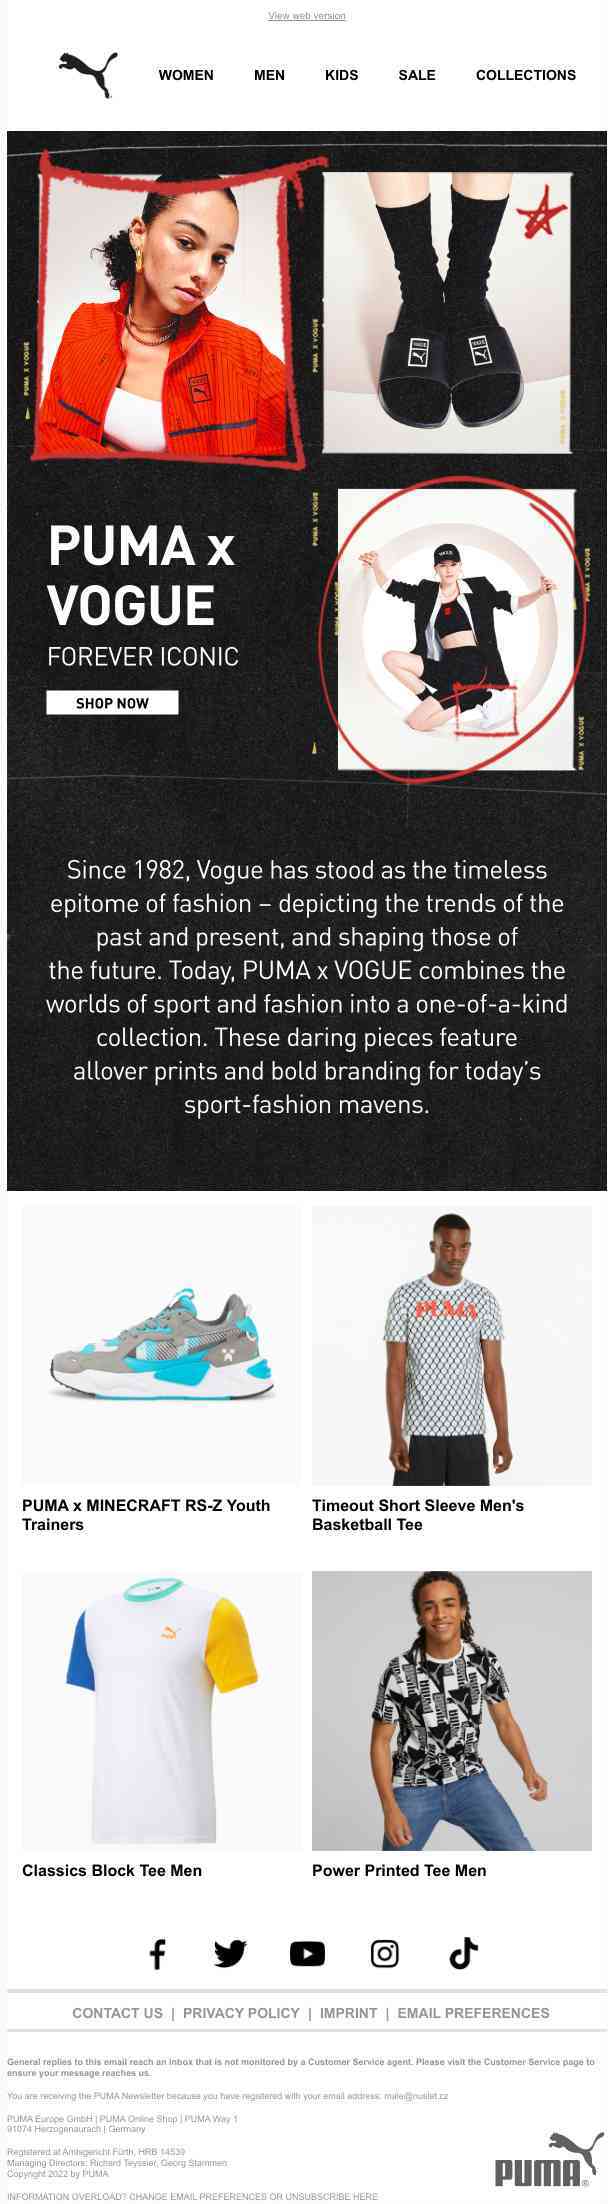 JUST DROPPED: PUMA x Vogue Collection